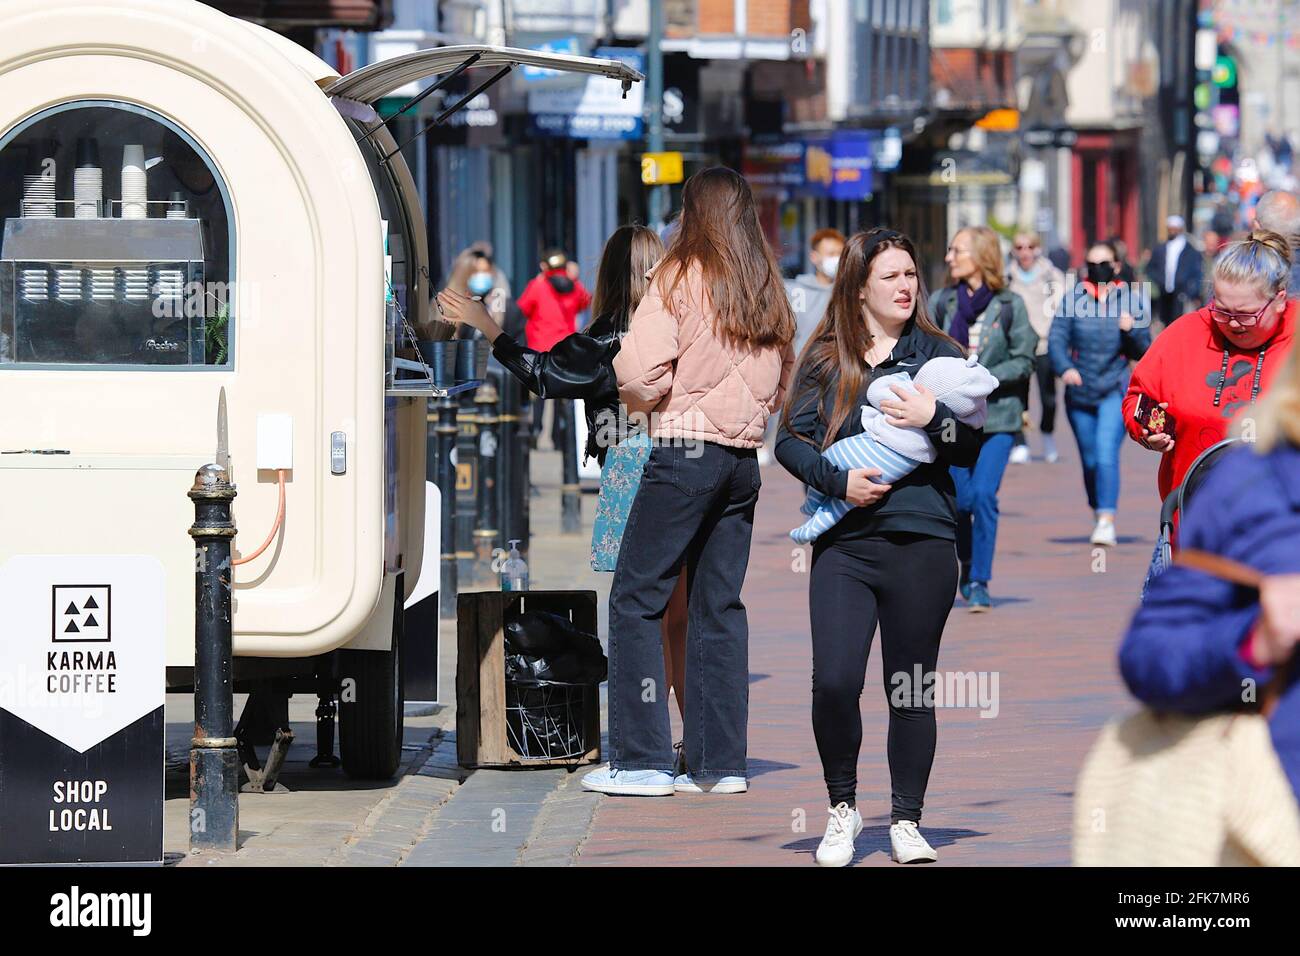 Canterbury, Kent, UK. 29 April, 2021. The Kent town of Canterbury is slowly regaining some resemblance of normalcy with lots of people walking around the high street enjoying the pleasant weather. Photo Credit: Paul Lawrenson /Alamy Live News Stock Photo